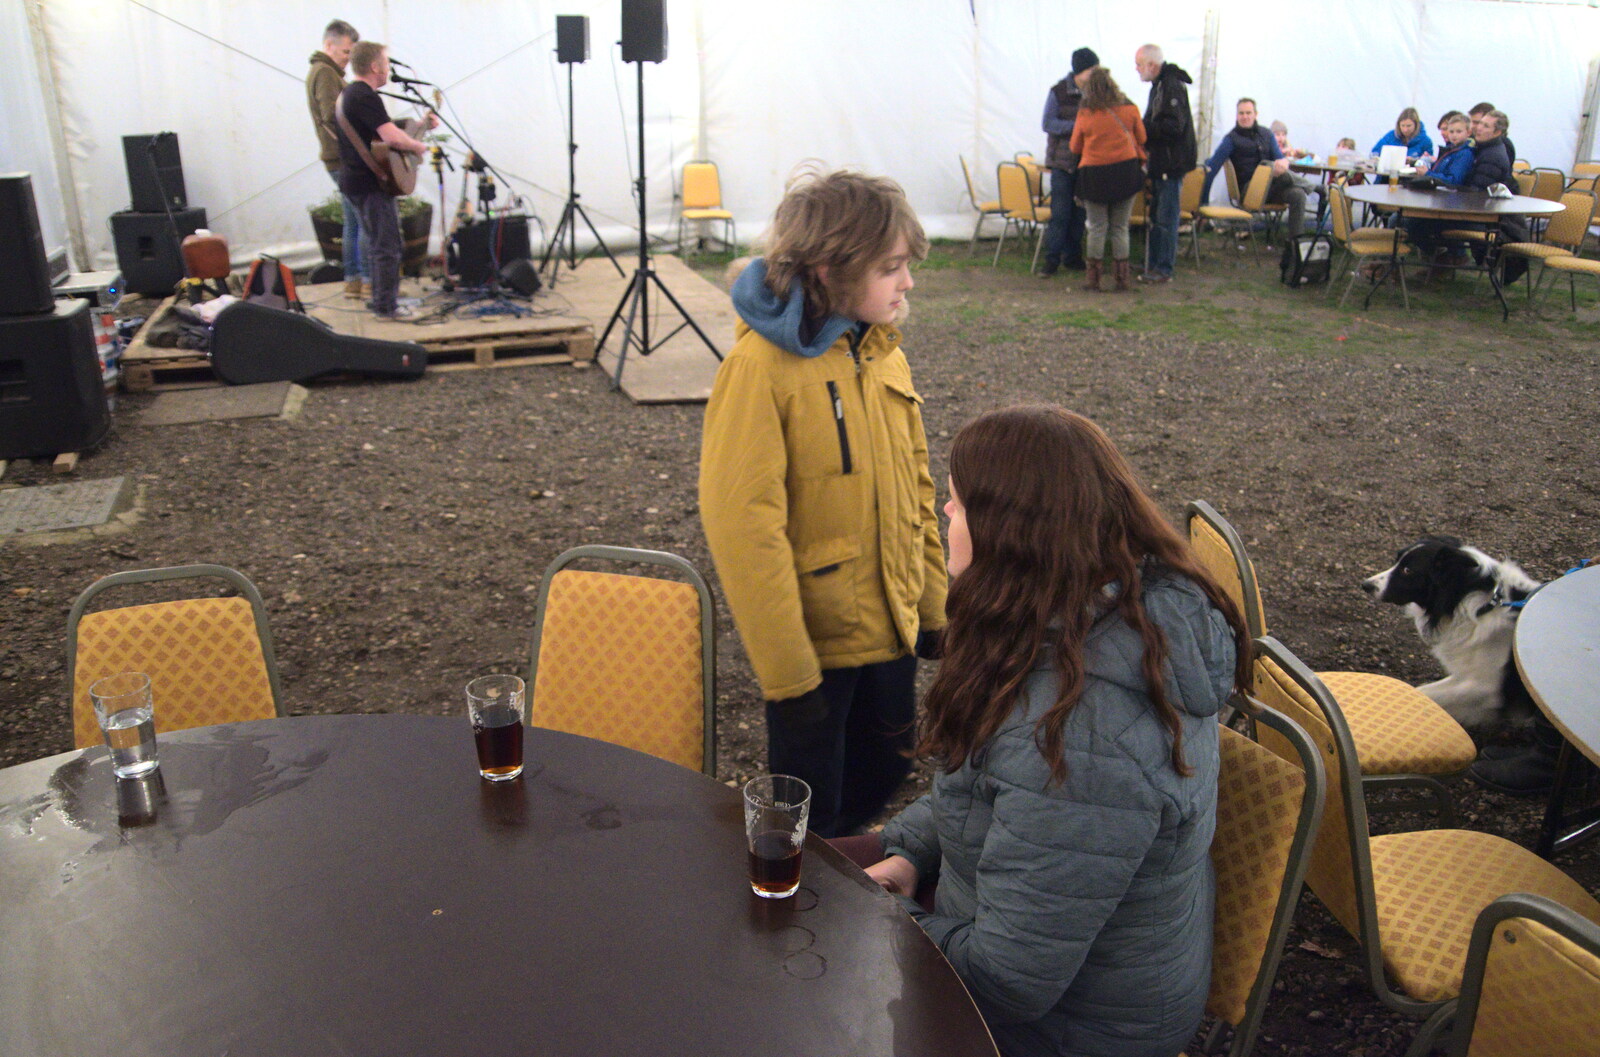 Fred hangs around as The Harvs get going from The Star Wing Winter Beer Fest, Redgrave, Suffolk - 31st January 2020